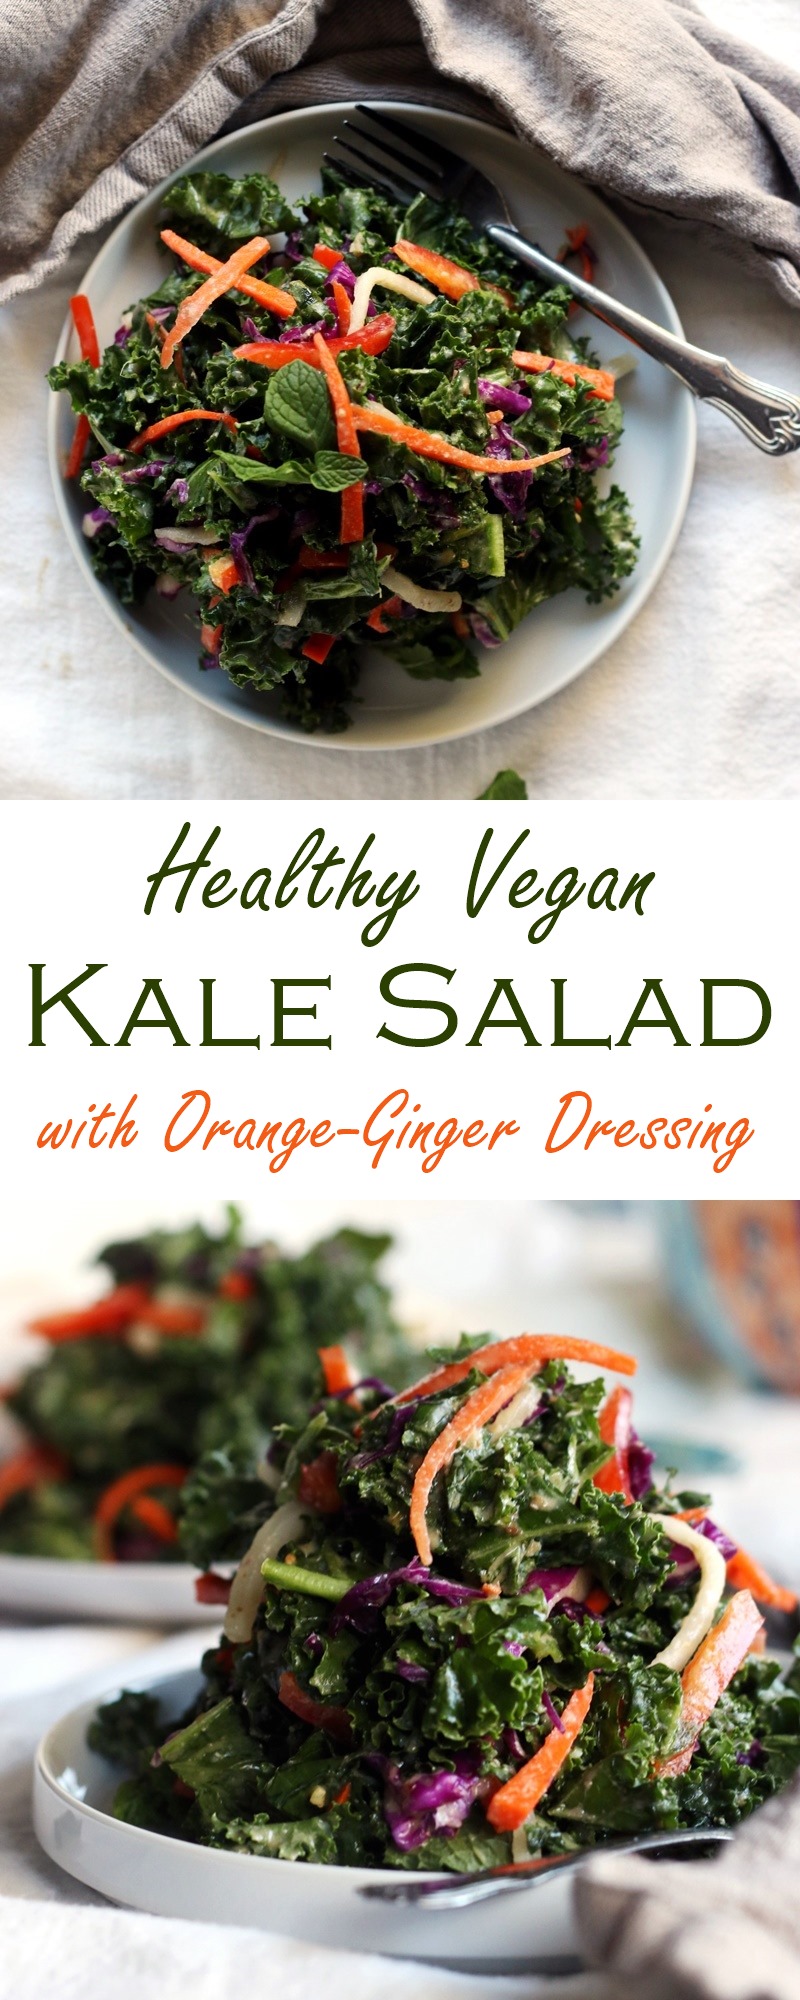 Colorful Kale Salad with Orange Ginger Dressing Recipe (Healthy, Vegan and Gluten-Free)